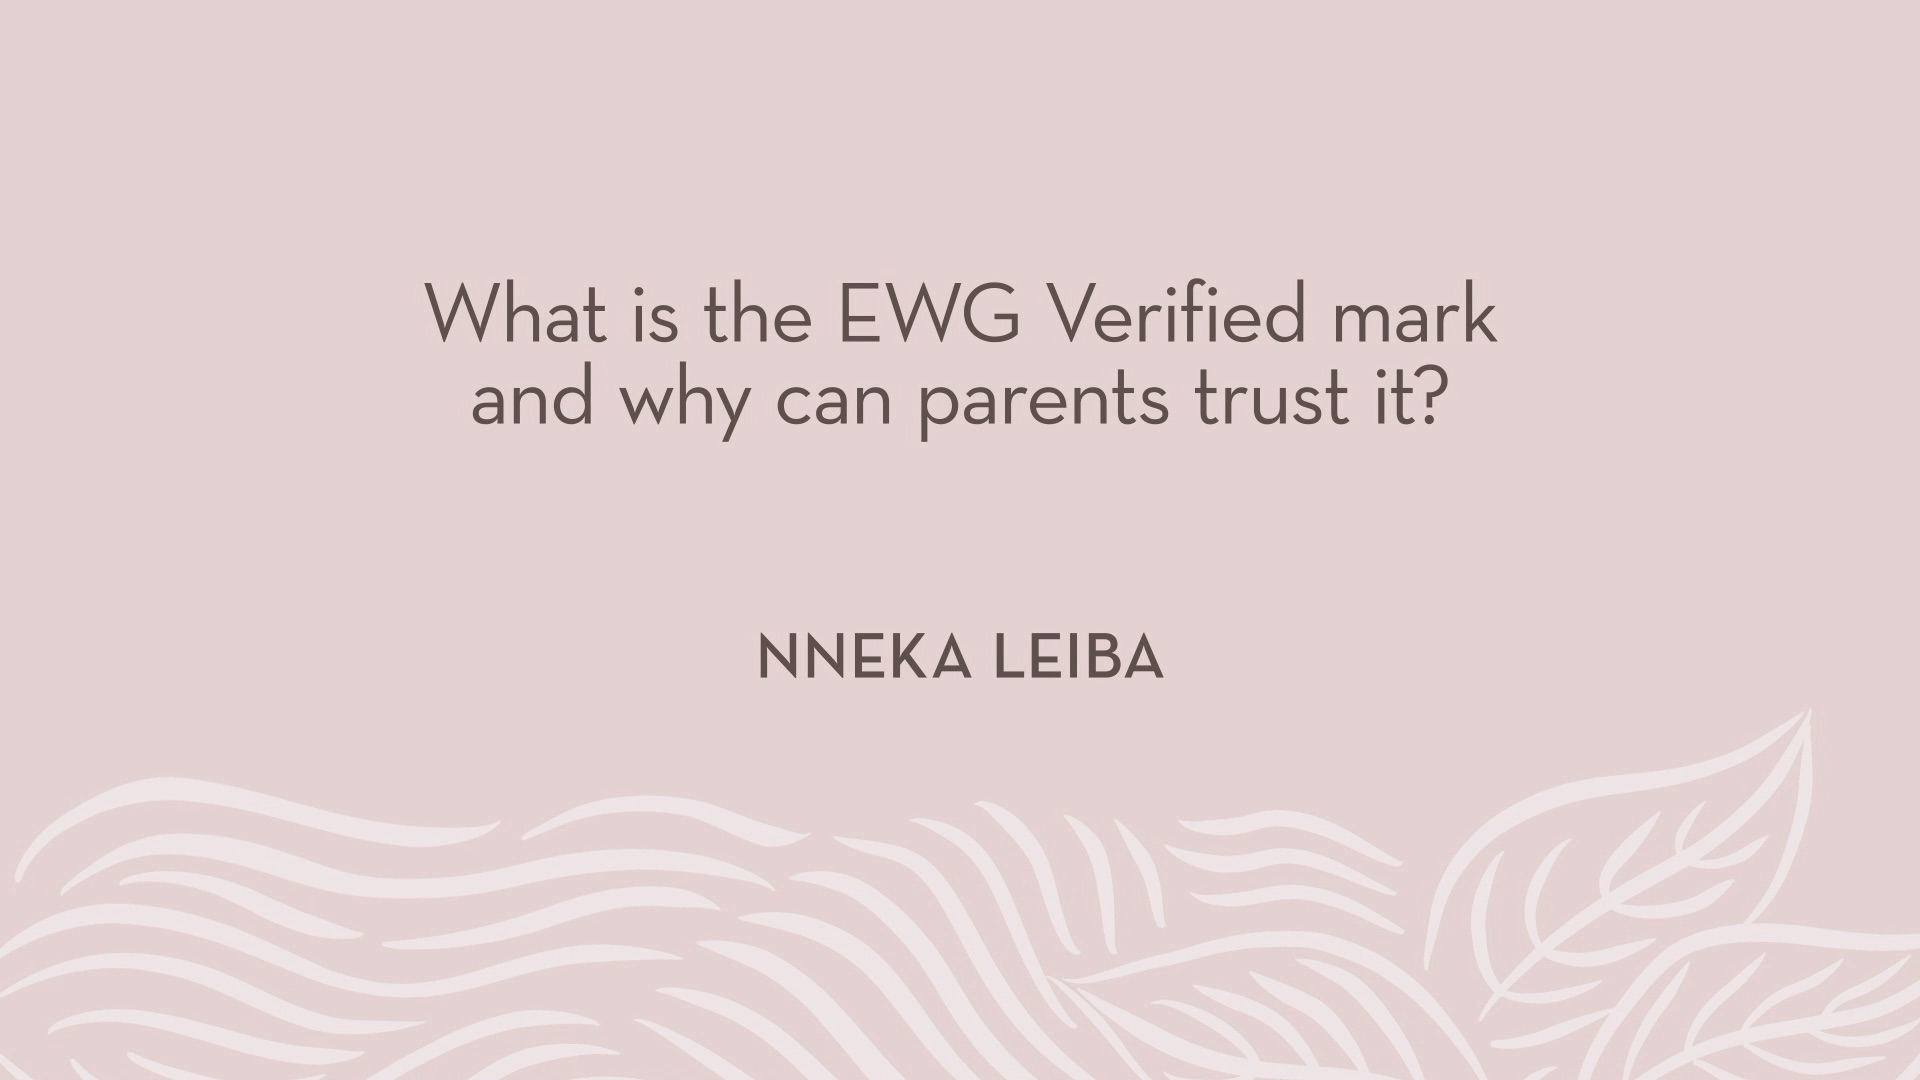 Nneka Leiba | What is the EWG Verified mark and why can parents trust it?